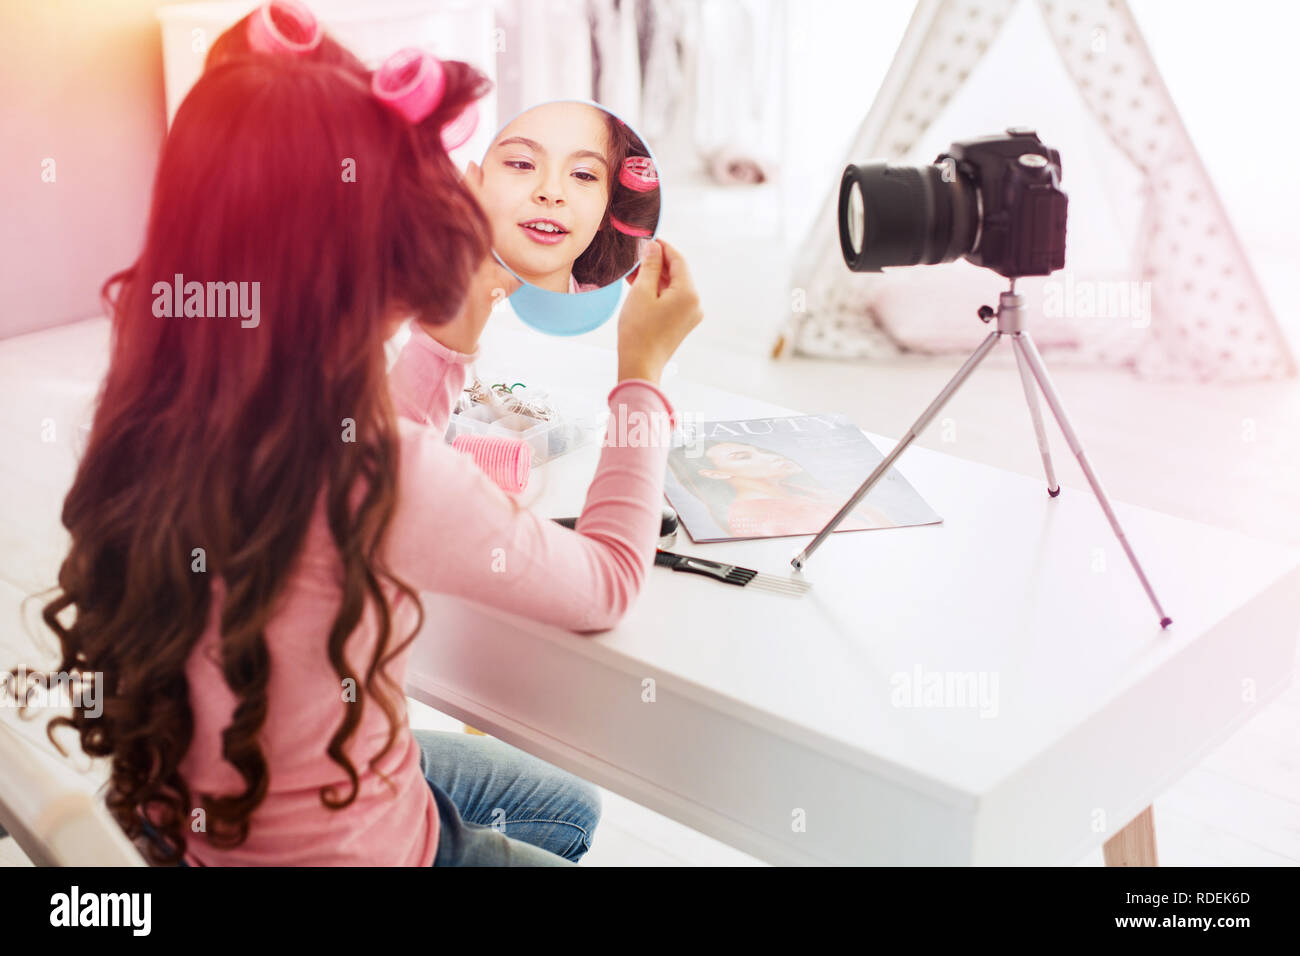 Little beautiful girl making little video presentation participating in beauty contest Stock Photo